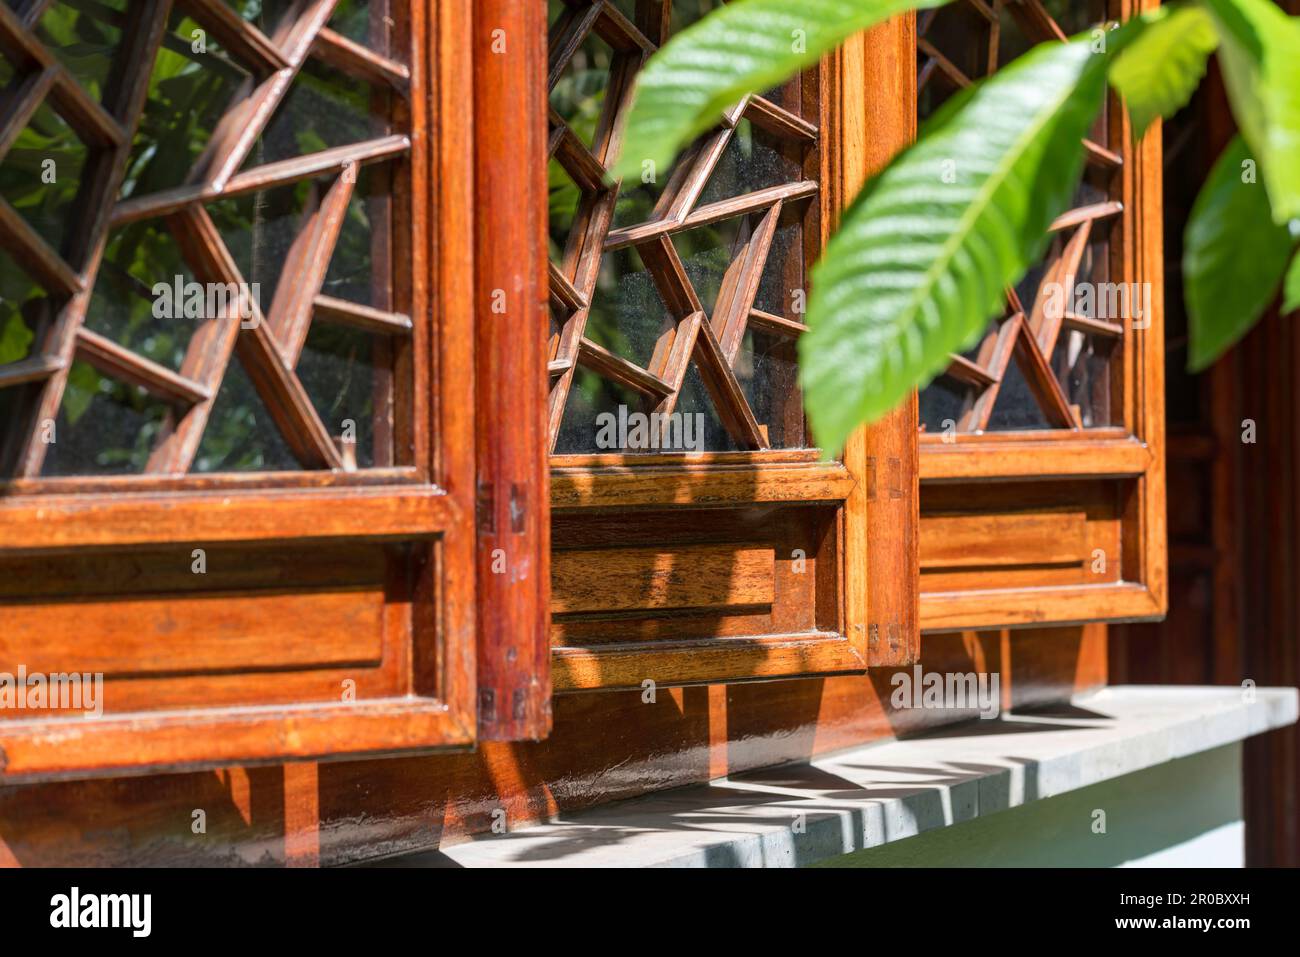 A close-up detail shot of timber window frames with intricate glazing at the Chinese Gardens of Friendship in Sydney, Australia Stock Photo